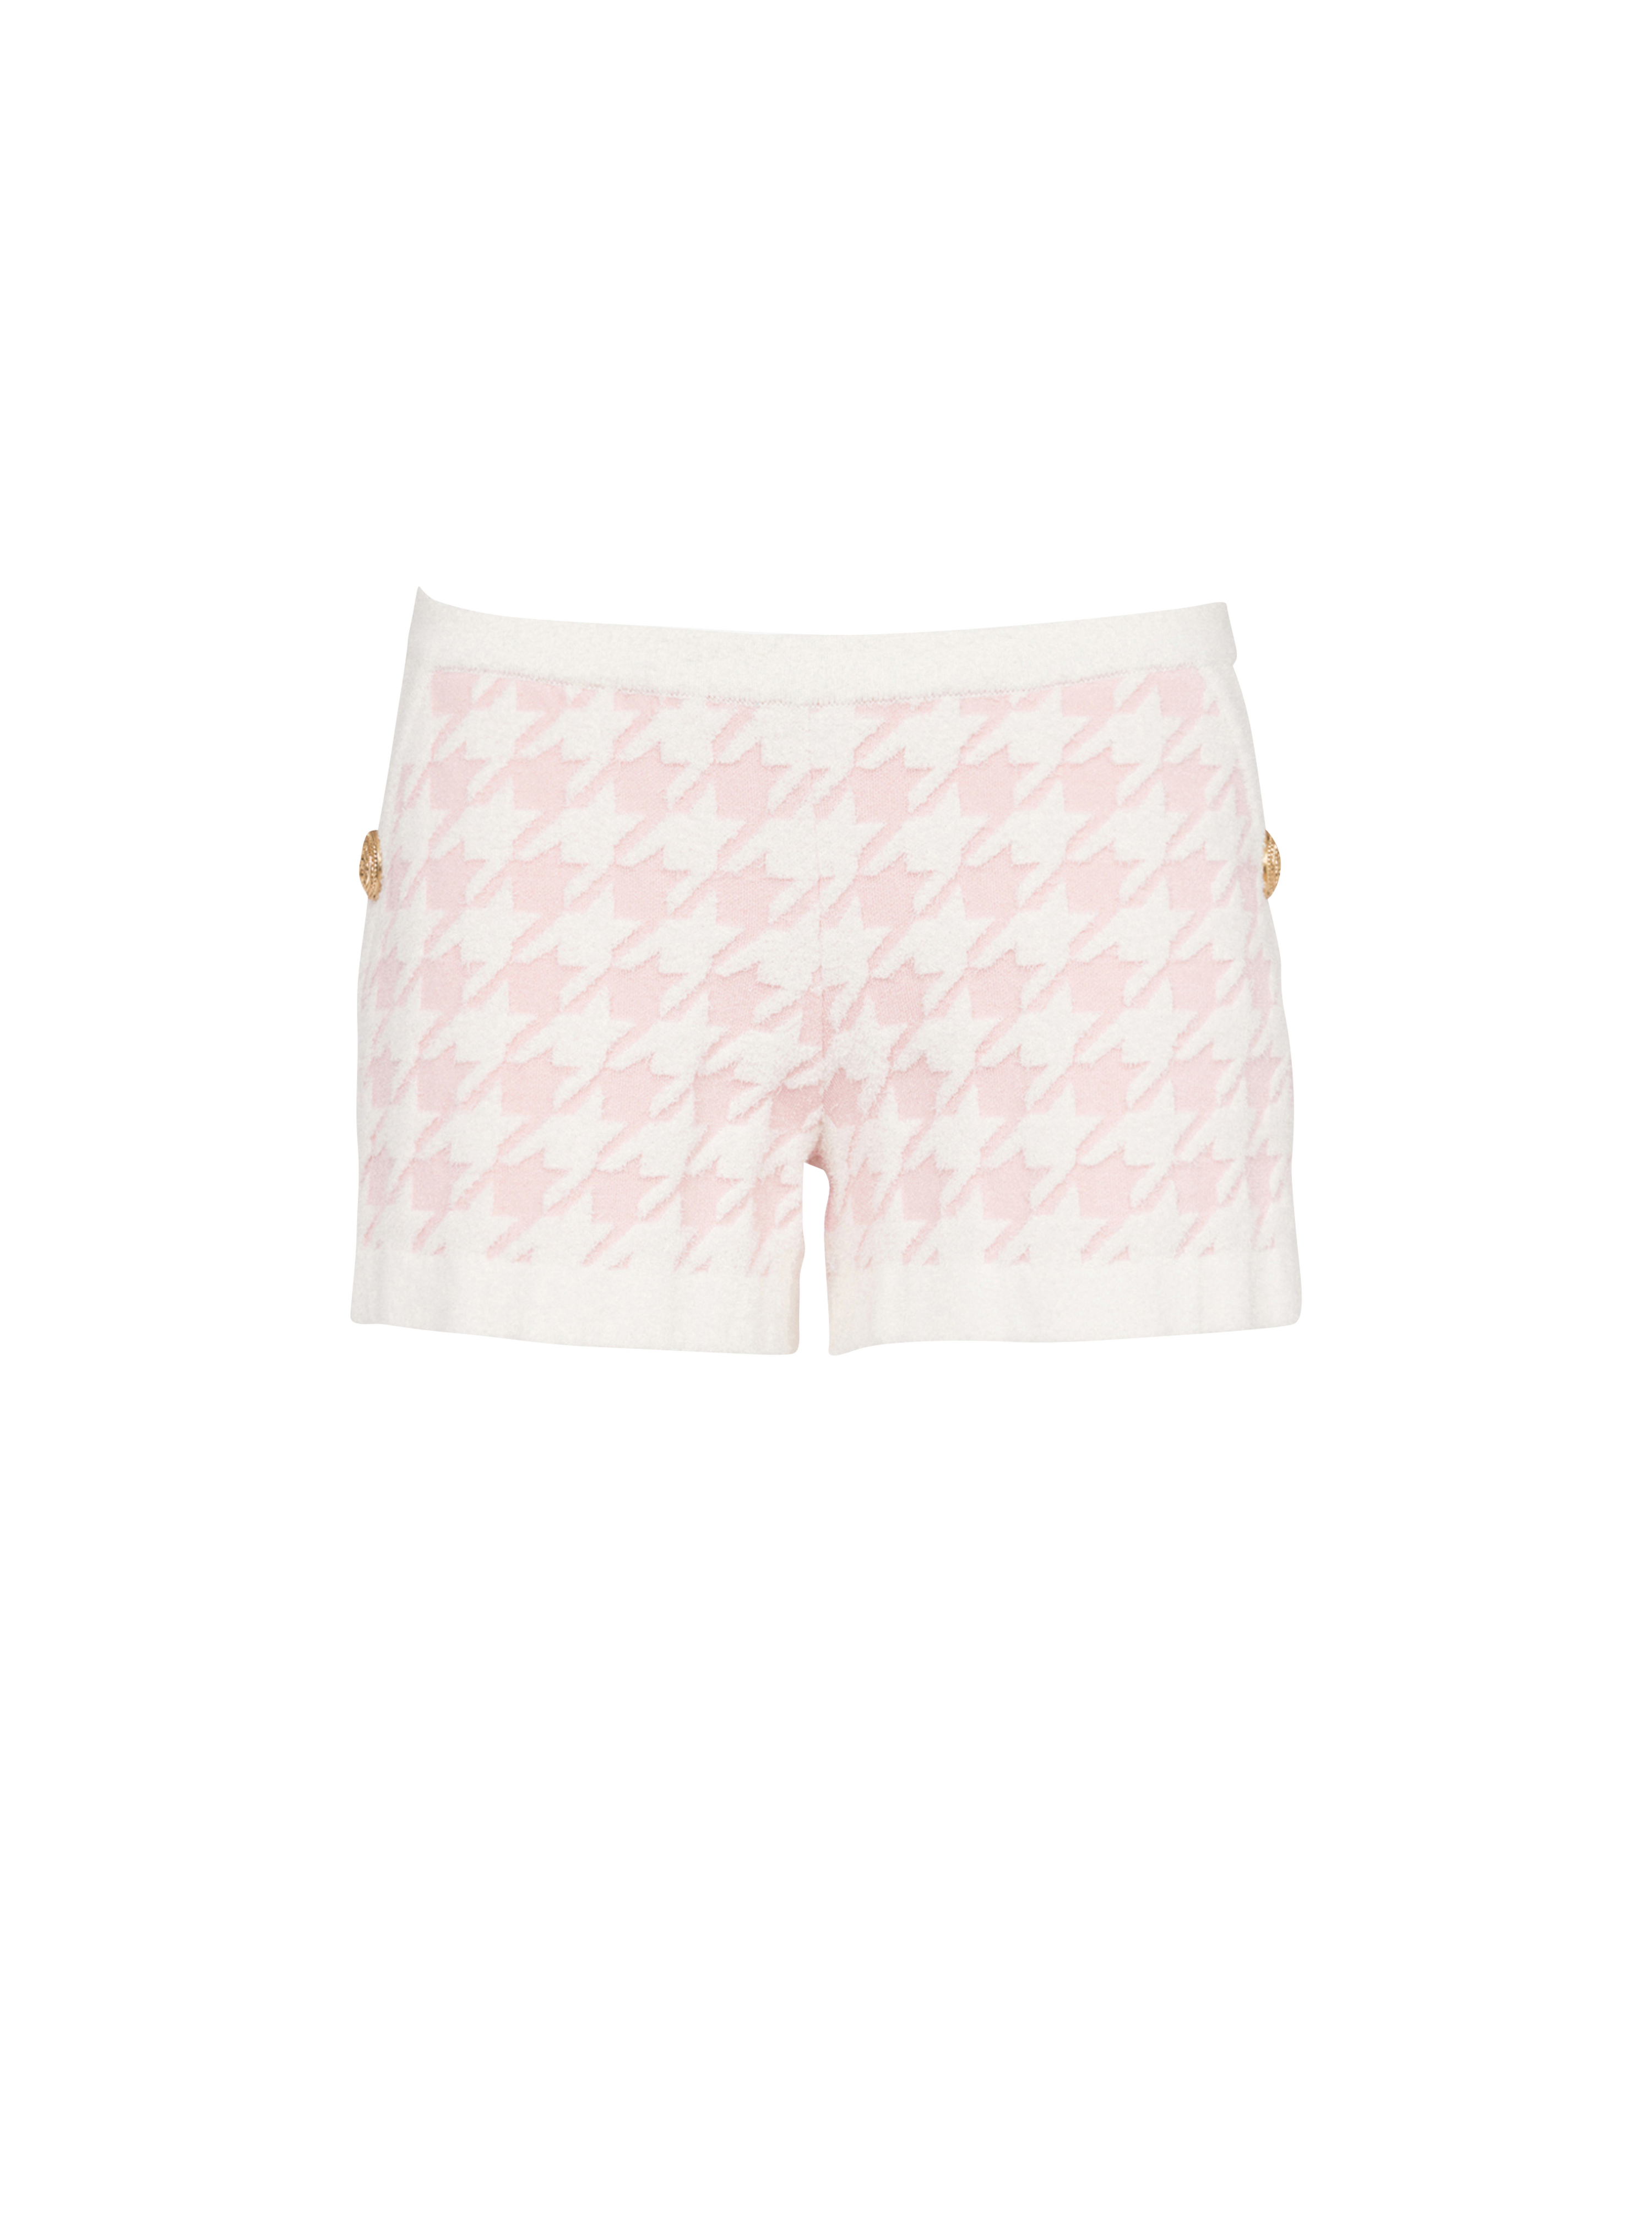 Houndstooth print high-waisted tweed shorts, pink, hi-res